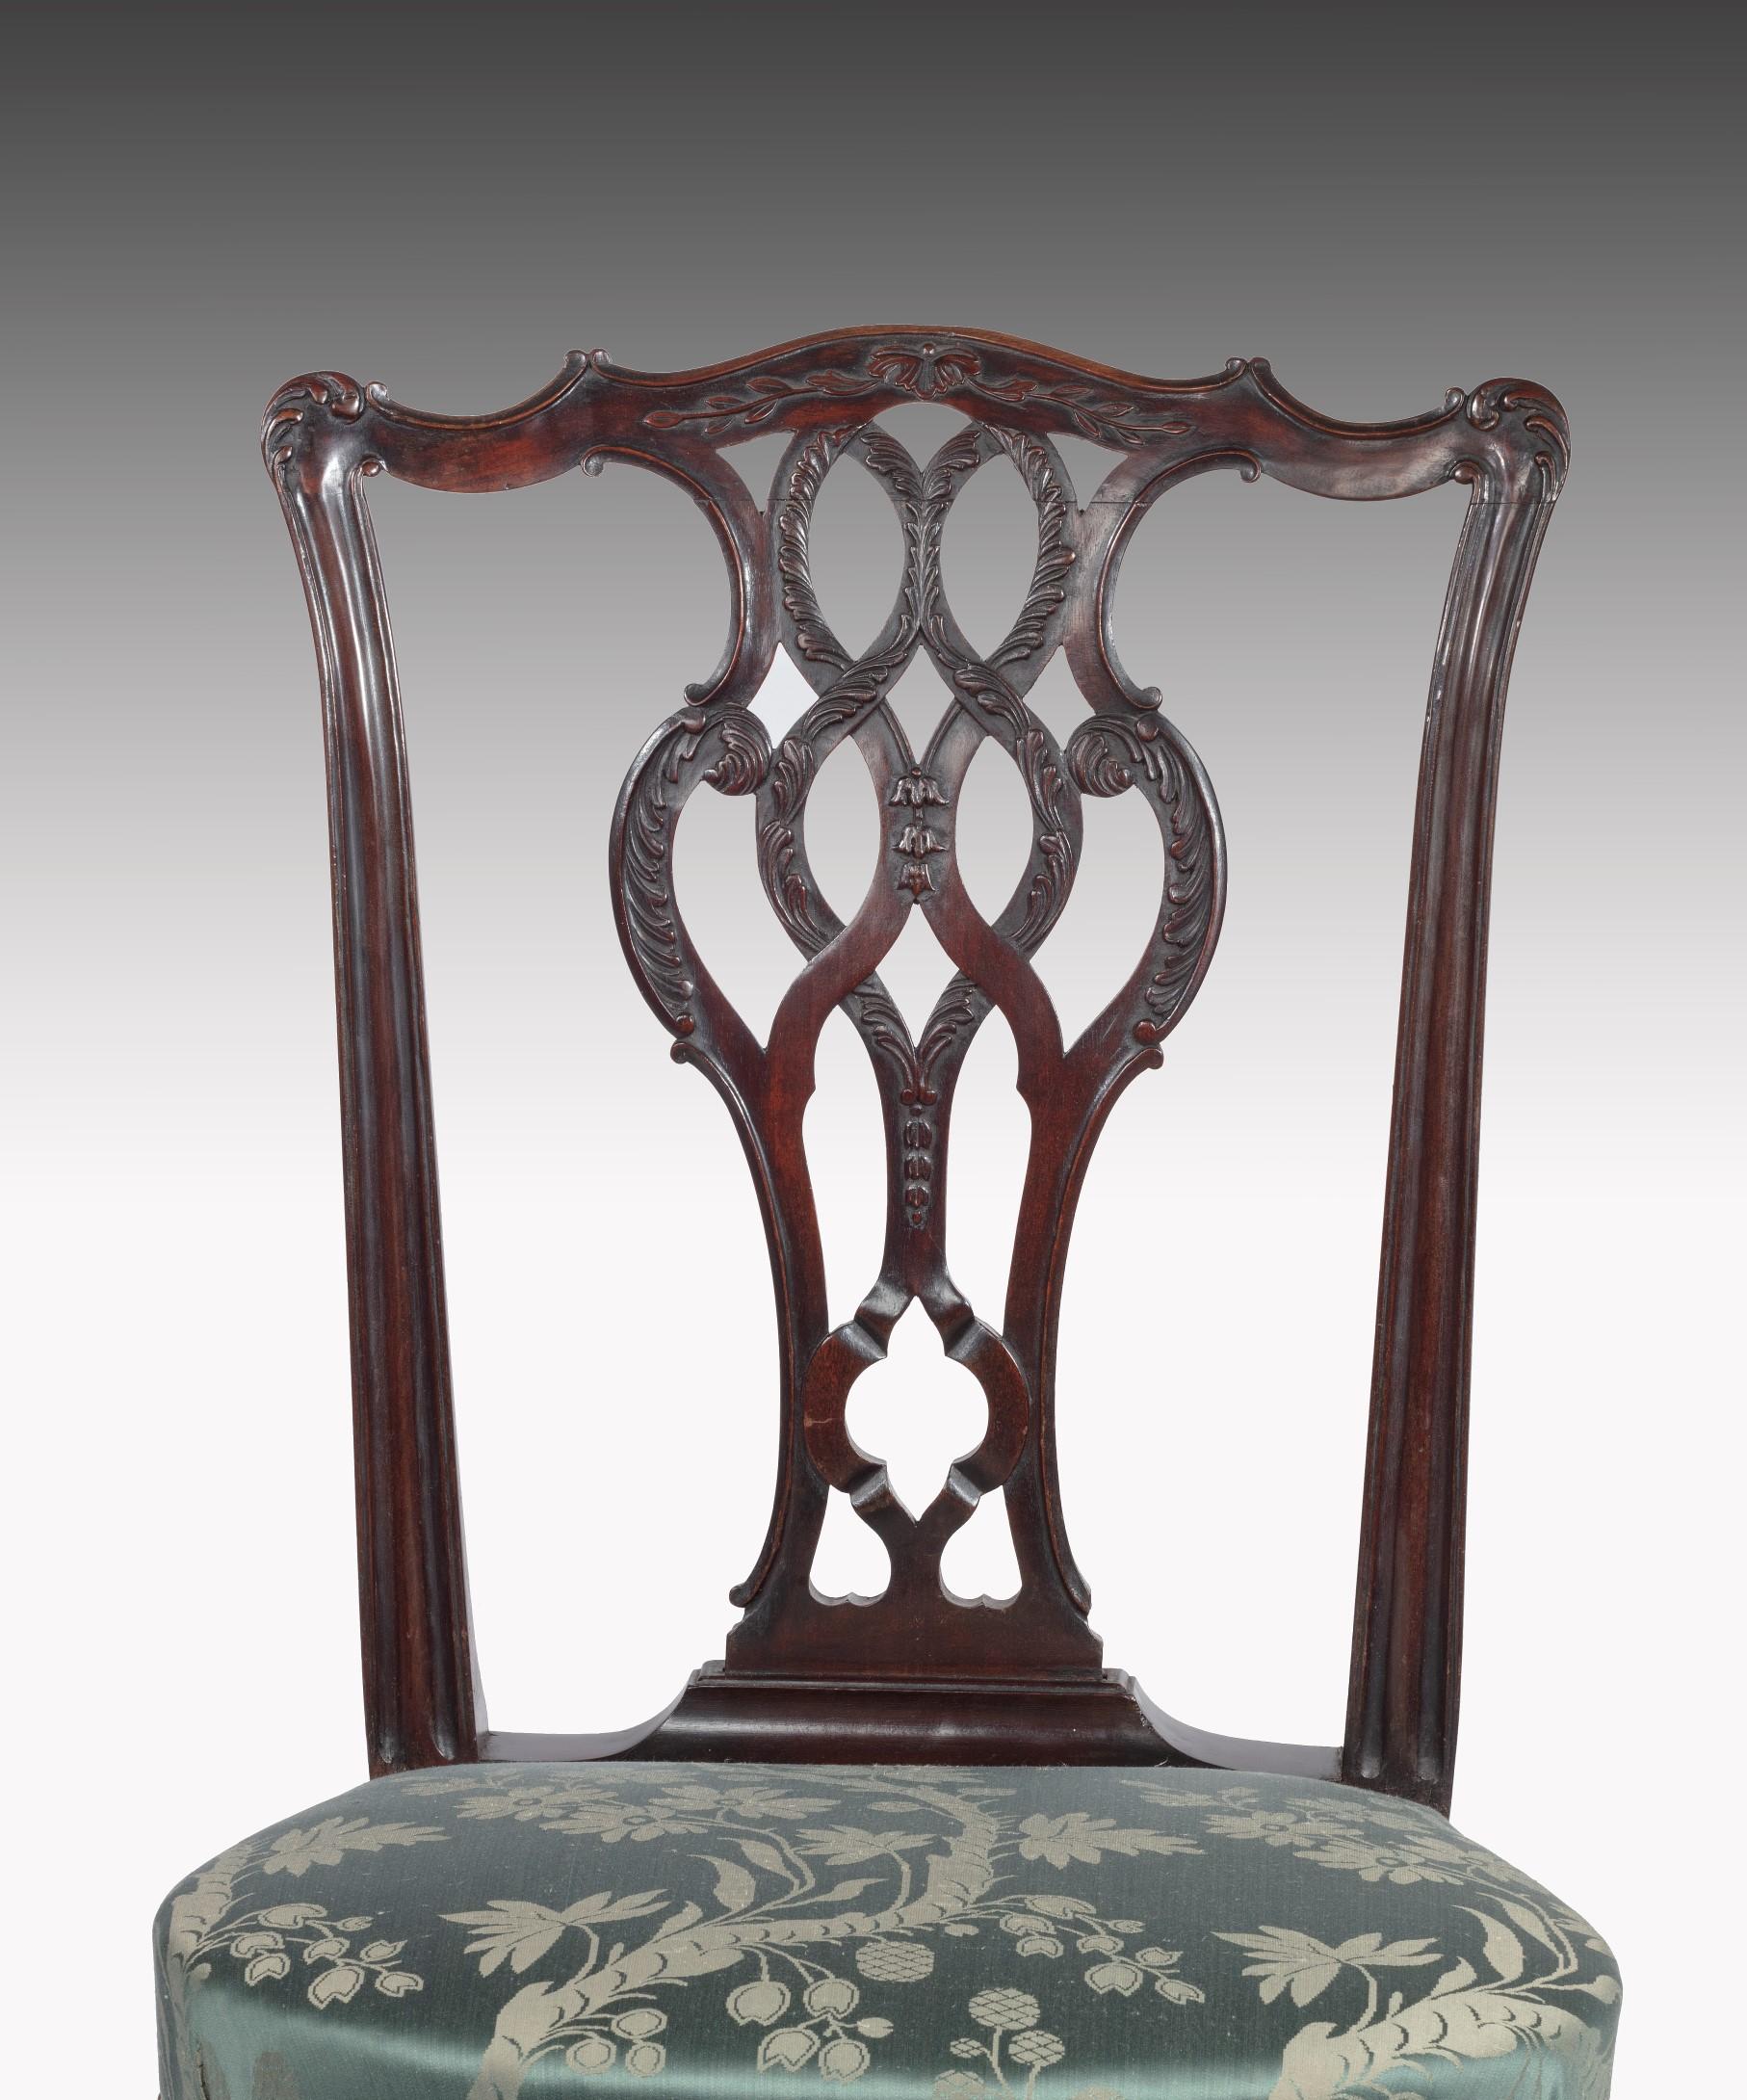 An elegant 18th century George II period carved mahogany side chair; the scrolling top rail above an interlaced splat carved with acanthus leaves and harebells above a stuff over seat upholstered in green damask and raised on cabriole legs which are